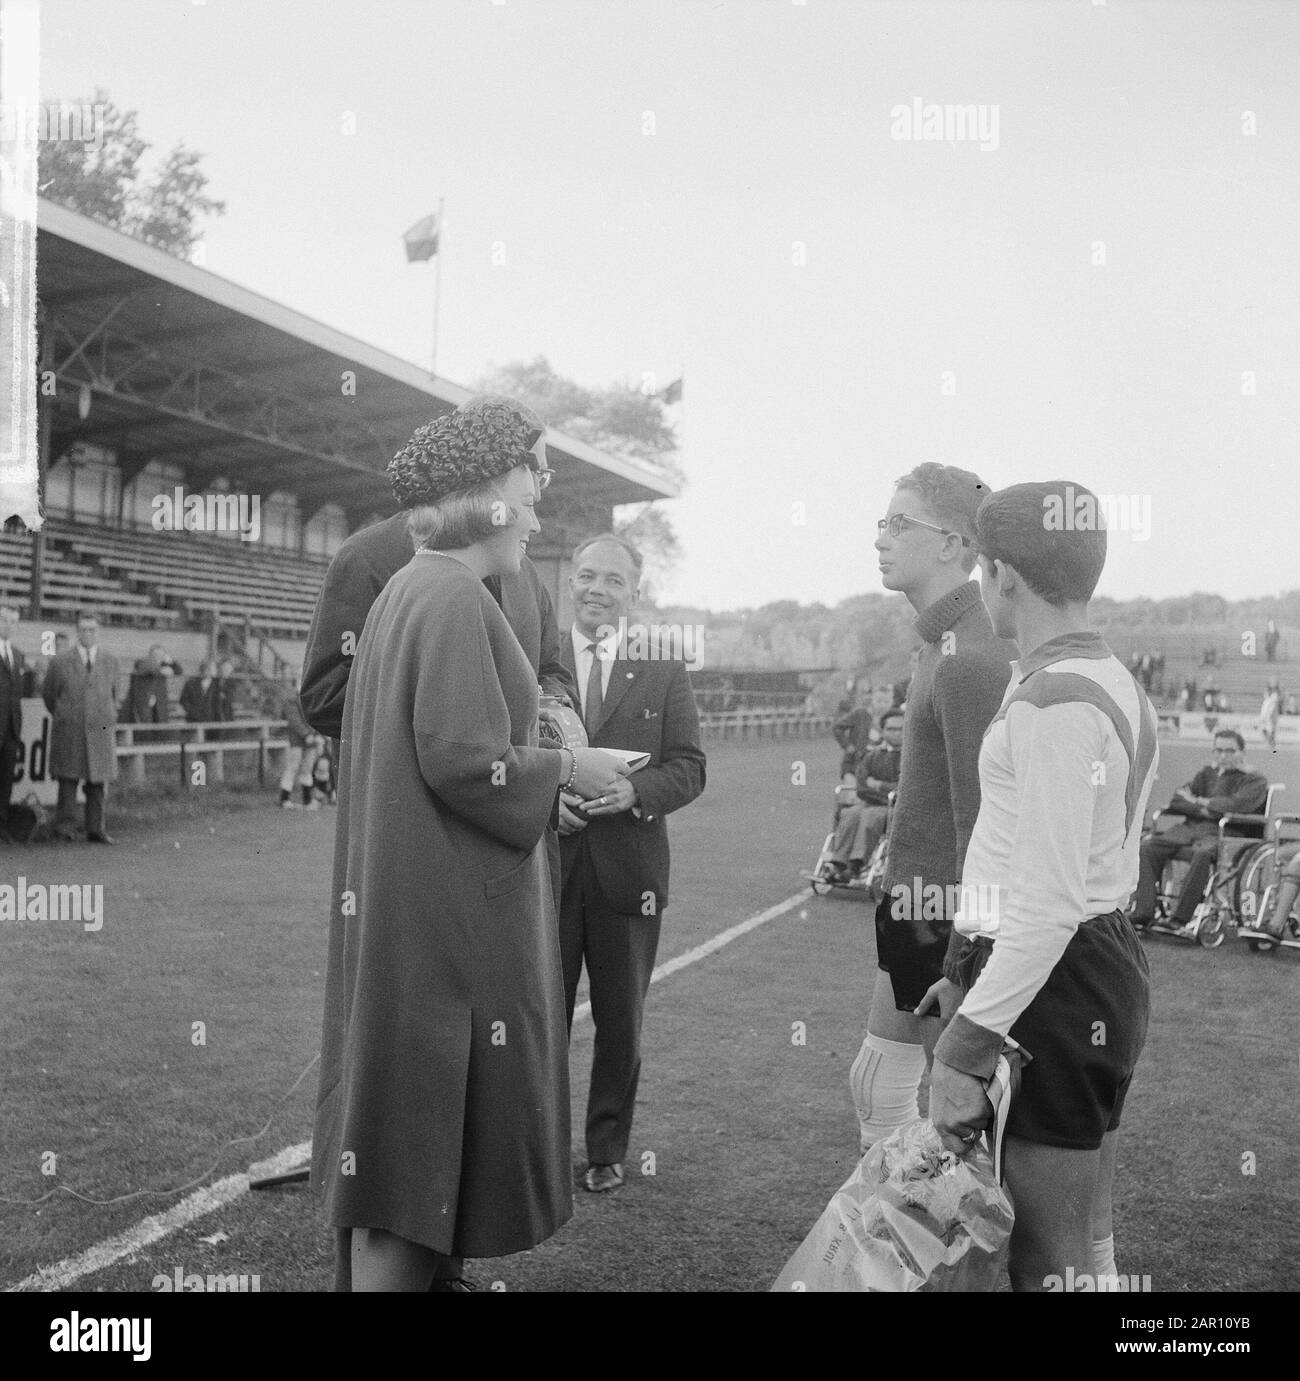 Princess Beatrix visited closing day of De Zwaluwen, Youth action polio in The Hague, Princess Beatrix speaks with youth players Date: October 3, 1964 Location: The Hague, Zuid-Holland Keywords: YOUTH ACTIONS, visits, princesses Personal name: Beatrix (princess Netherlands) Stock Photo